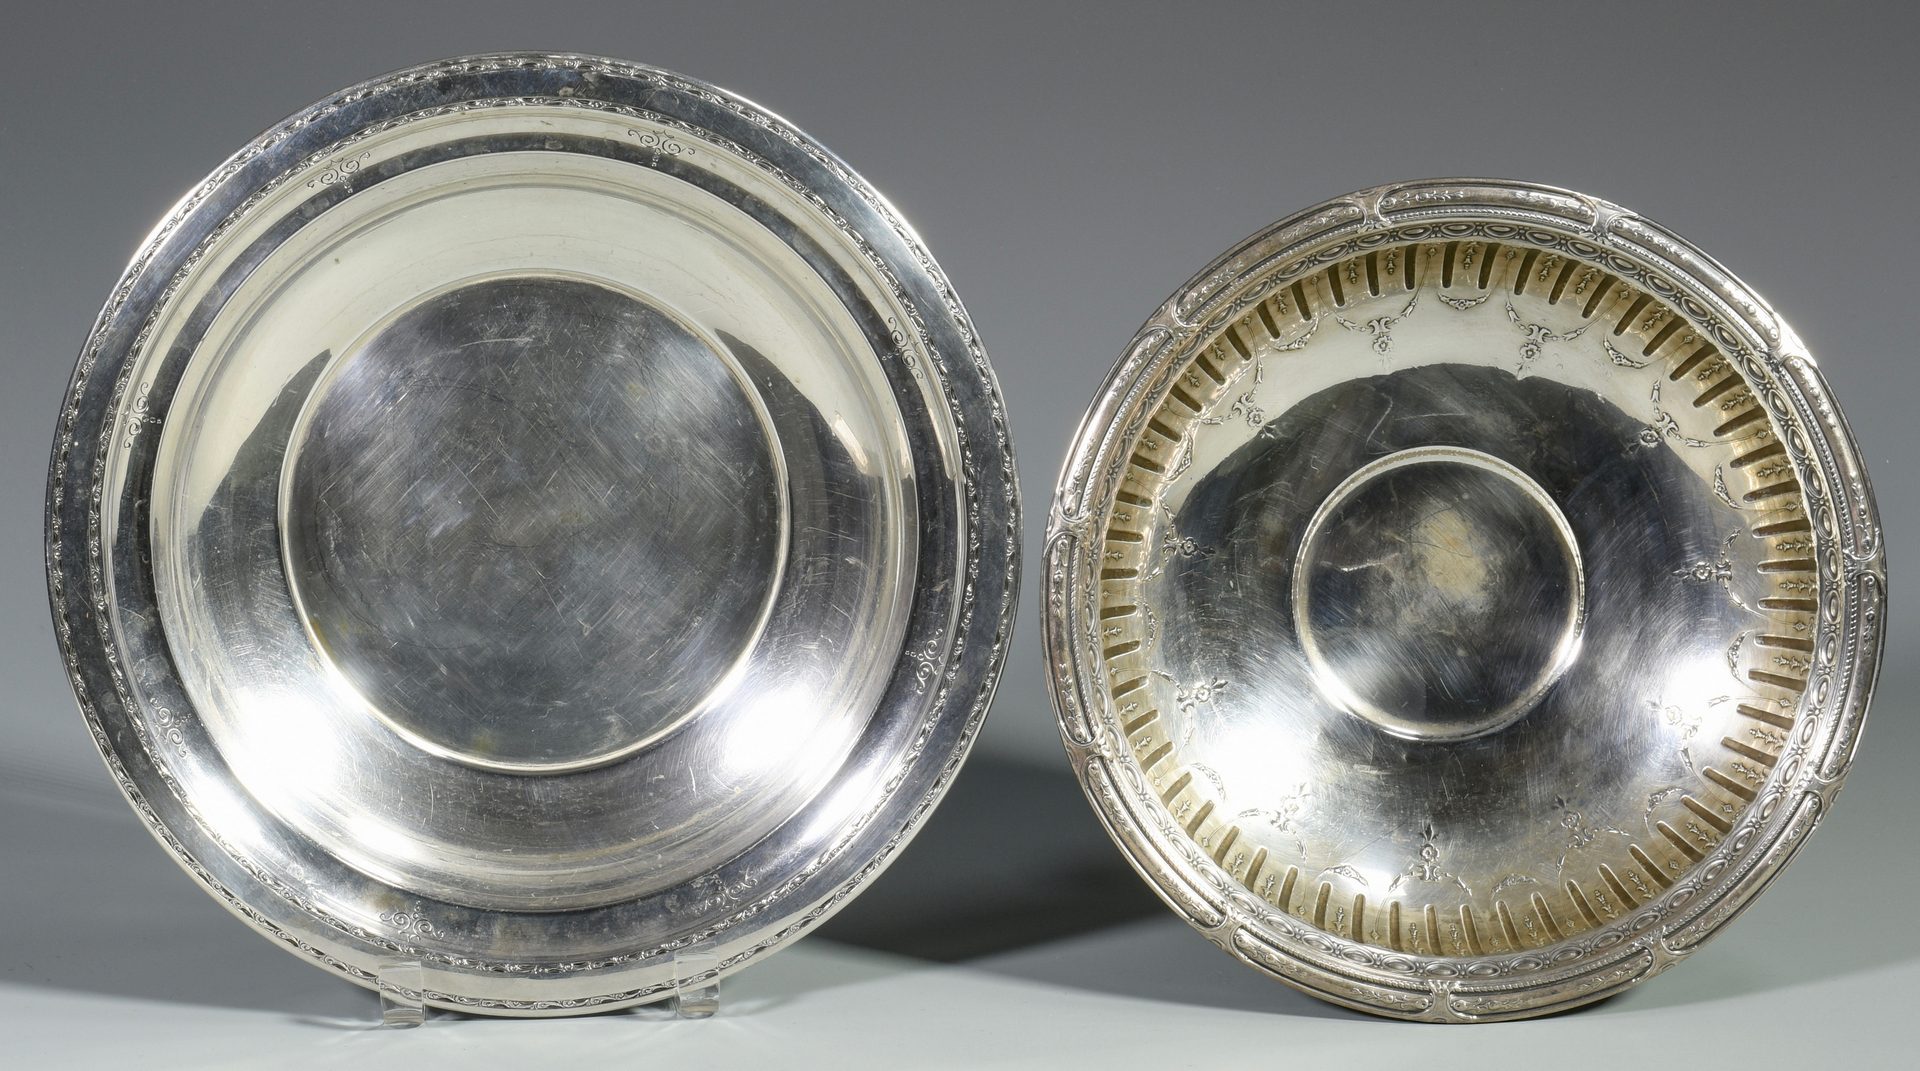 Lot 854: 2 Sterling Silver Bowls, Gorham and Towle